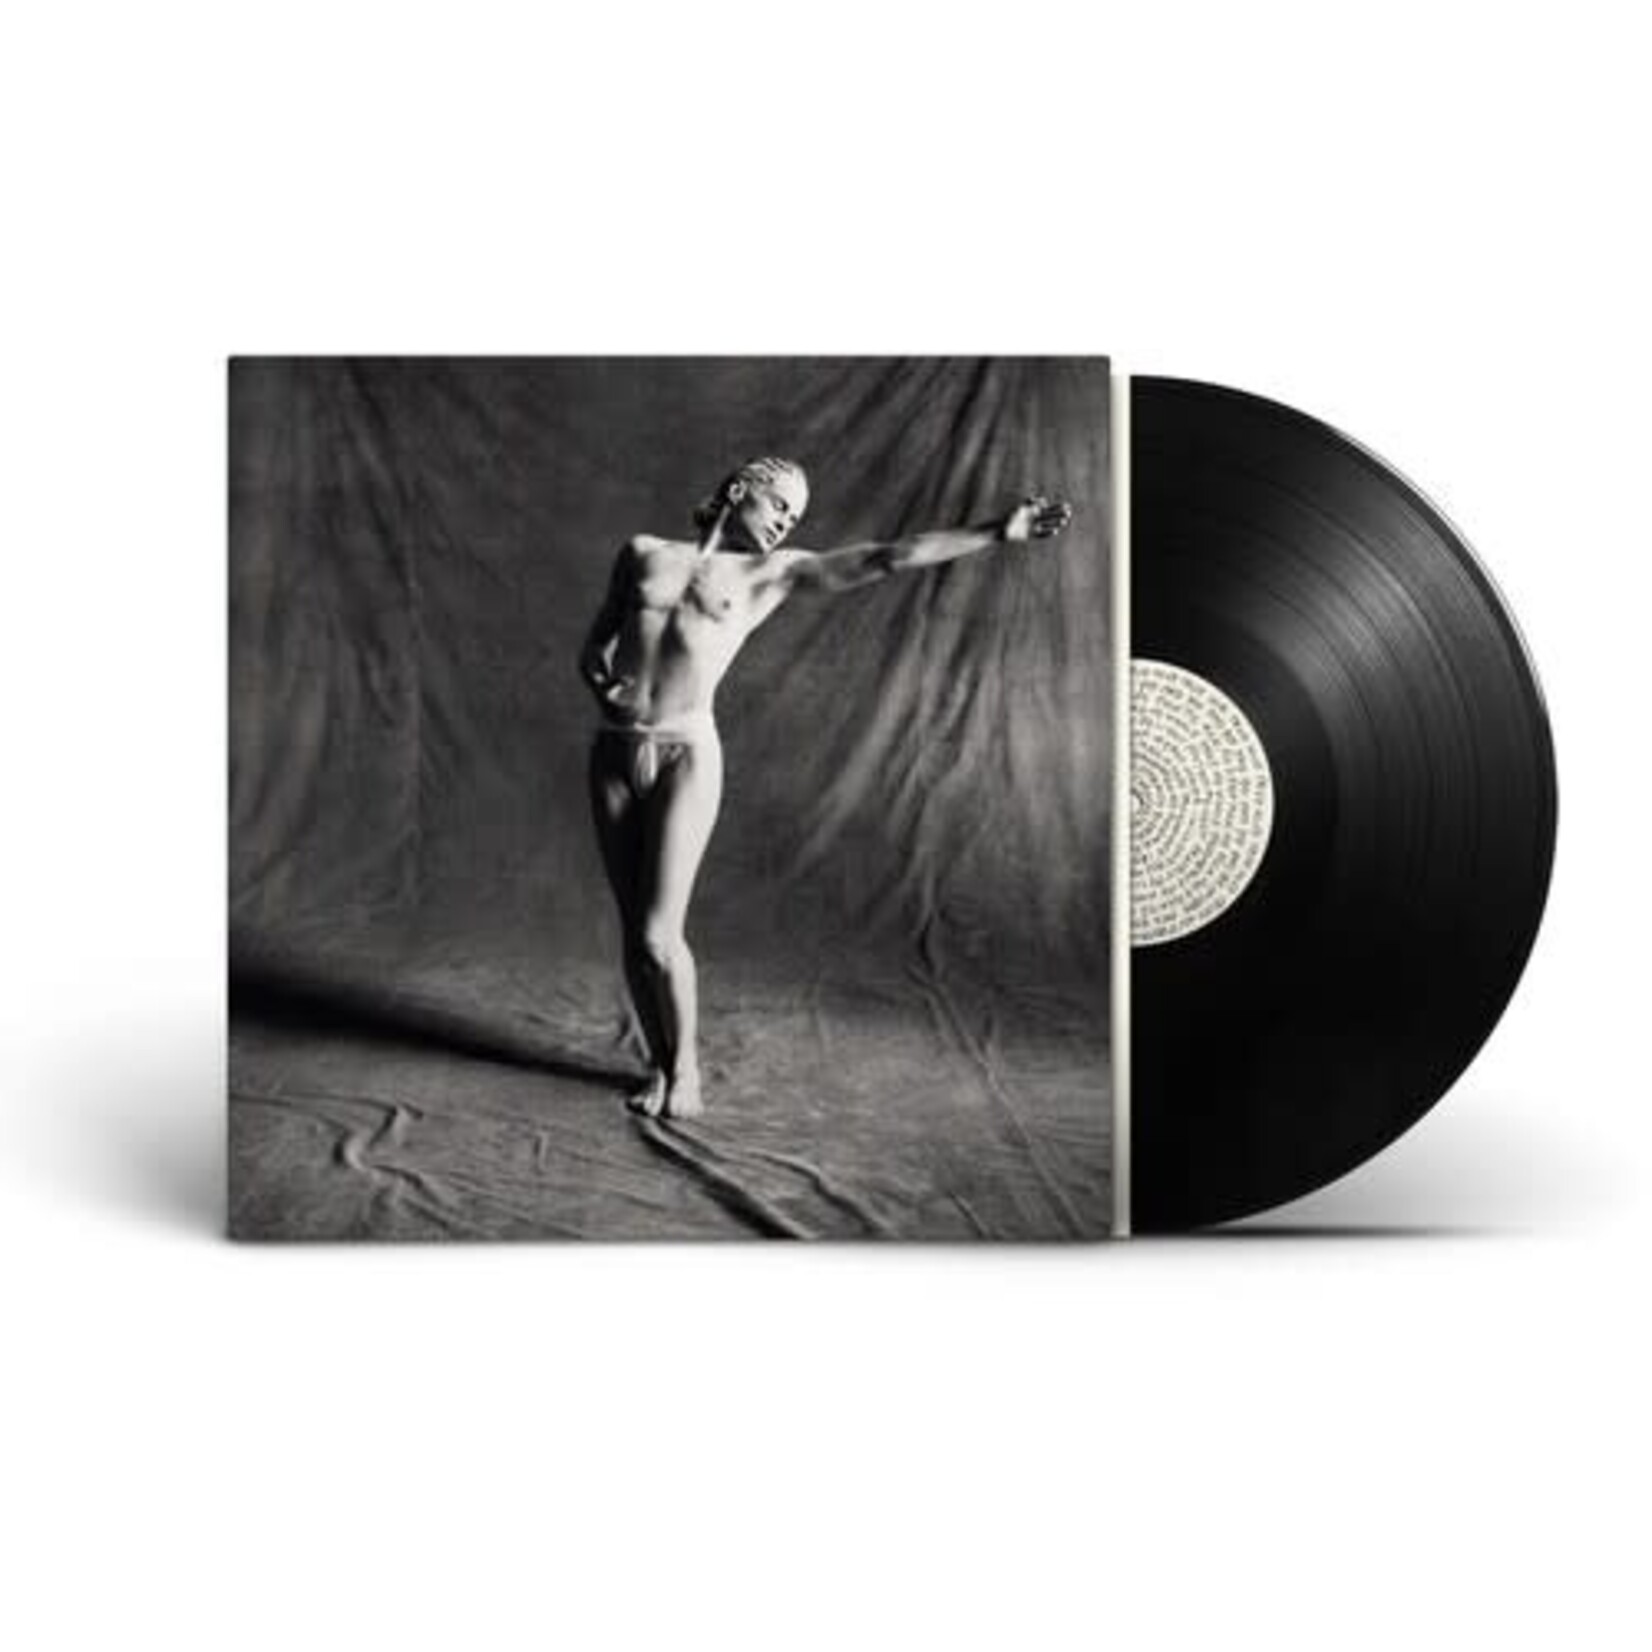 Because Music Christine and the Queens - Paranoia, Angels, True Love (LP)